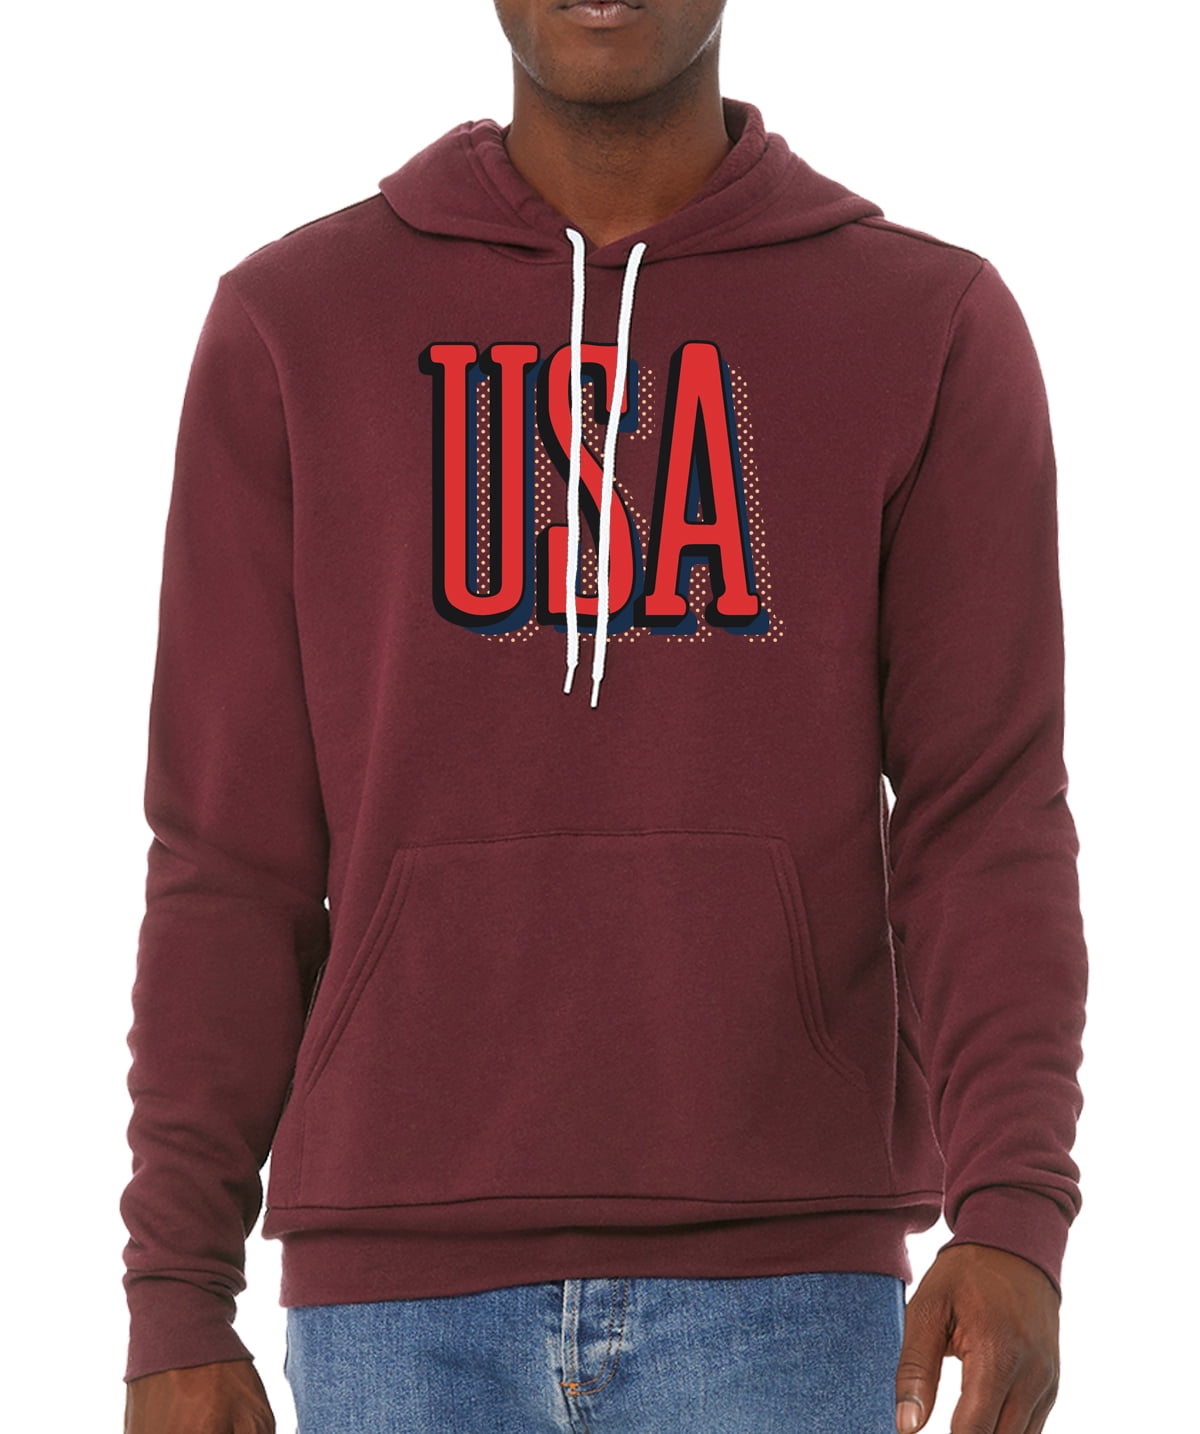 USA Patriot Hoodie, 4th of July Sweater, Unisex Graphic hoodies ...